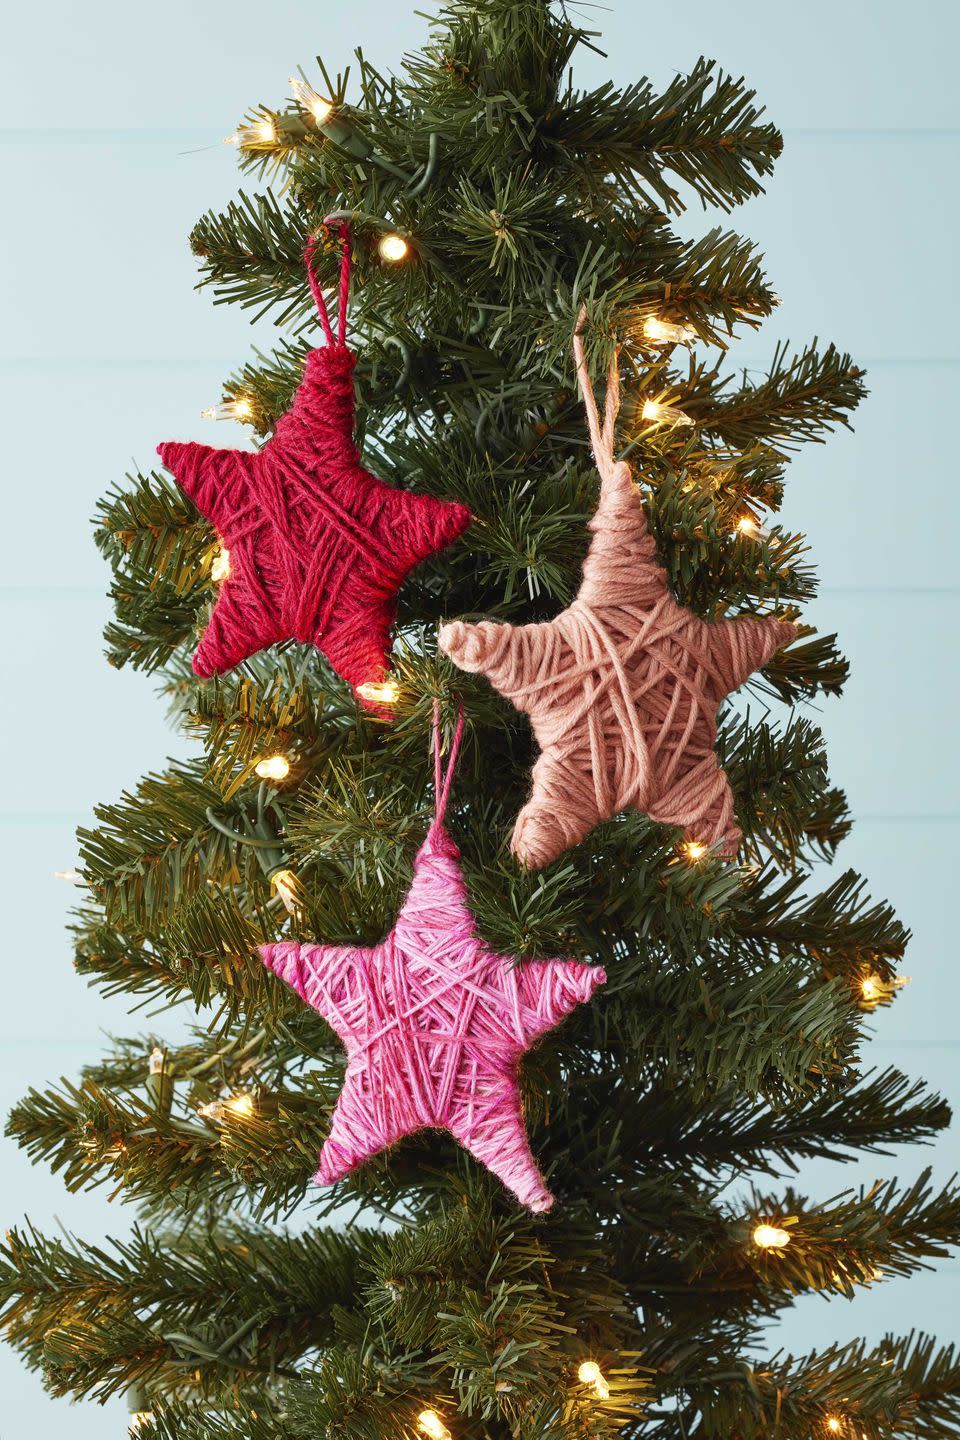 star shaped ornaments covered in colorful yarn hung on a christmas tree